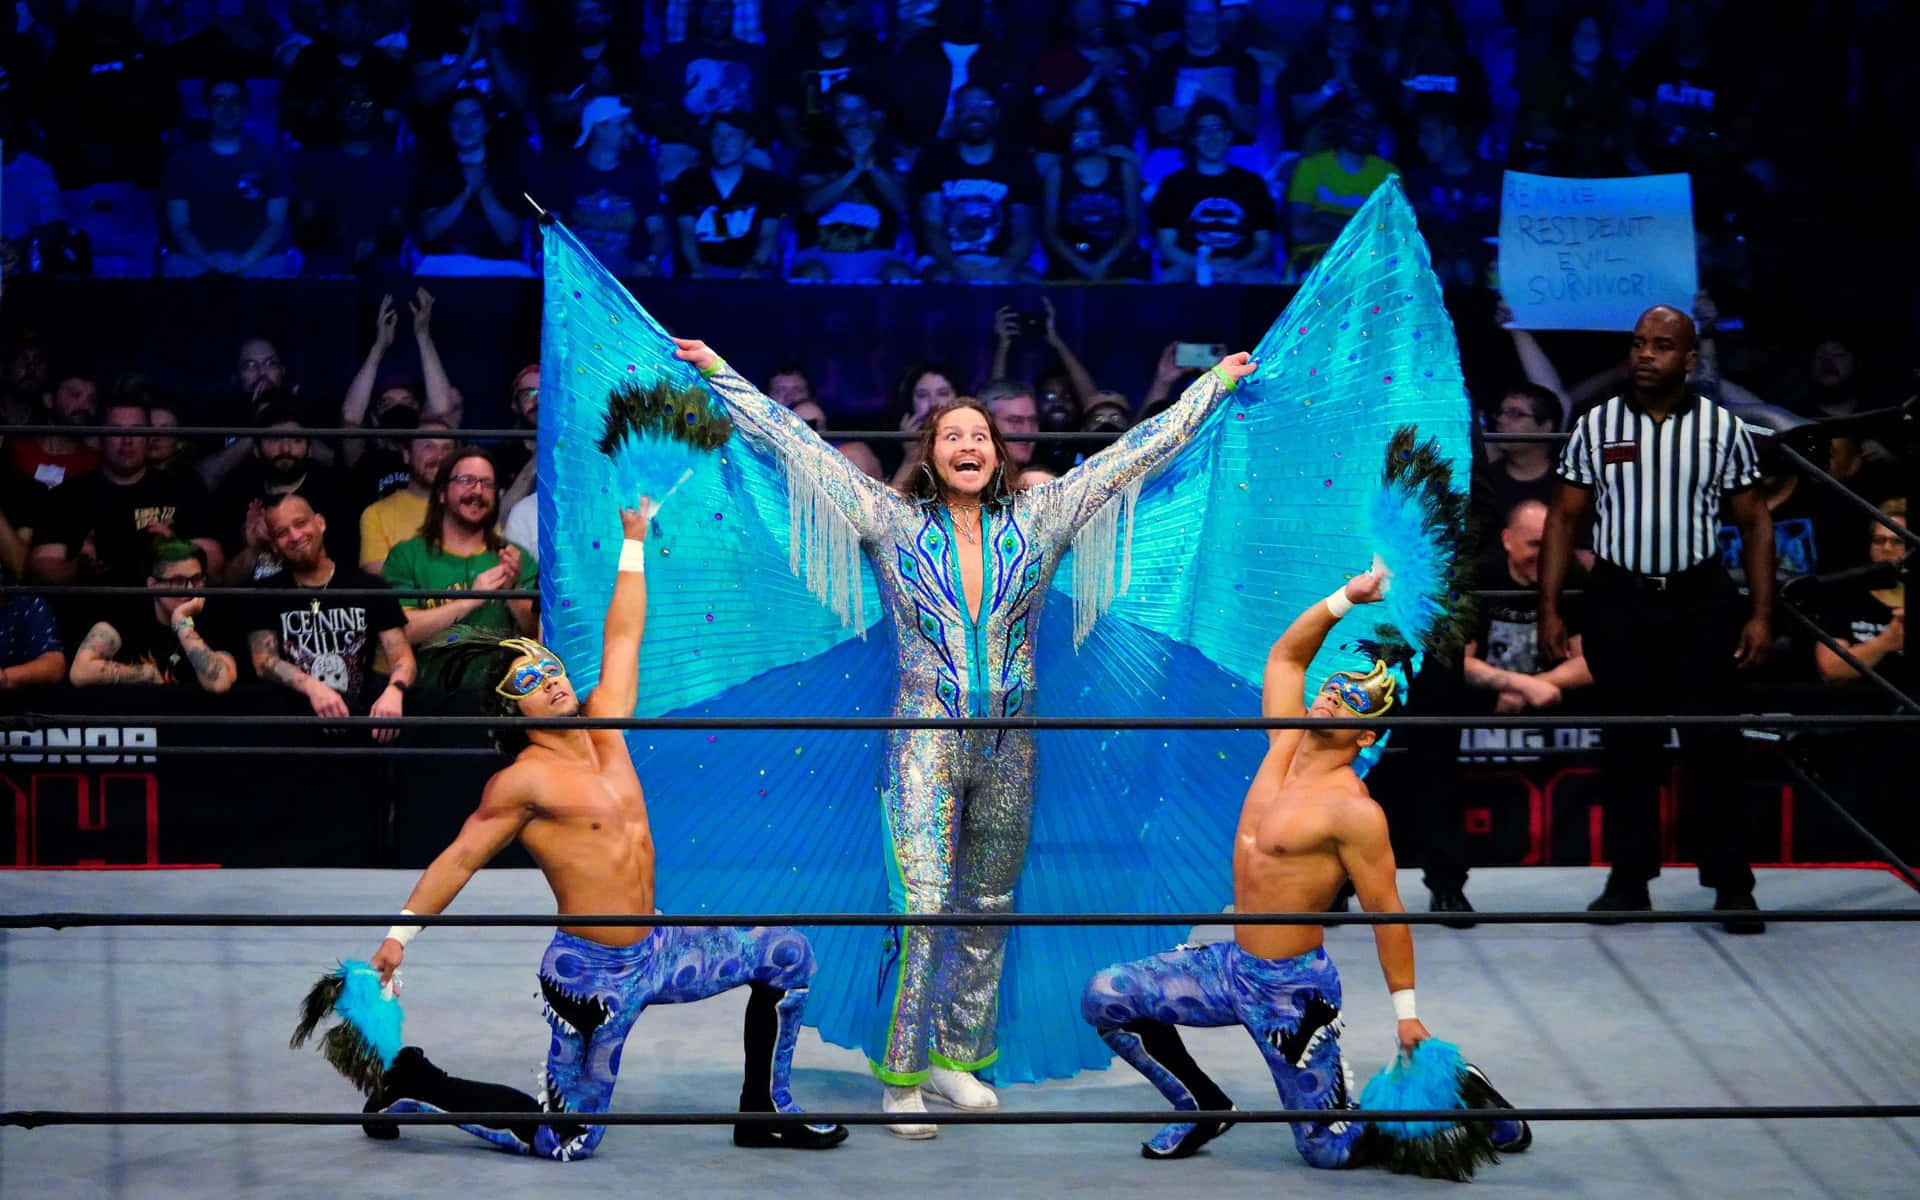 Aewprofessionell Brottare Dalton Castle Med Brandon Och Brent. (note: The Concept Of Computer Or Mobile Wallpaper Is Not Prominent In This Sentence, So It's Difficult To Translate In Context. This Is A Literal Translation Of The Sentence Given.) Wallpaper